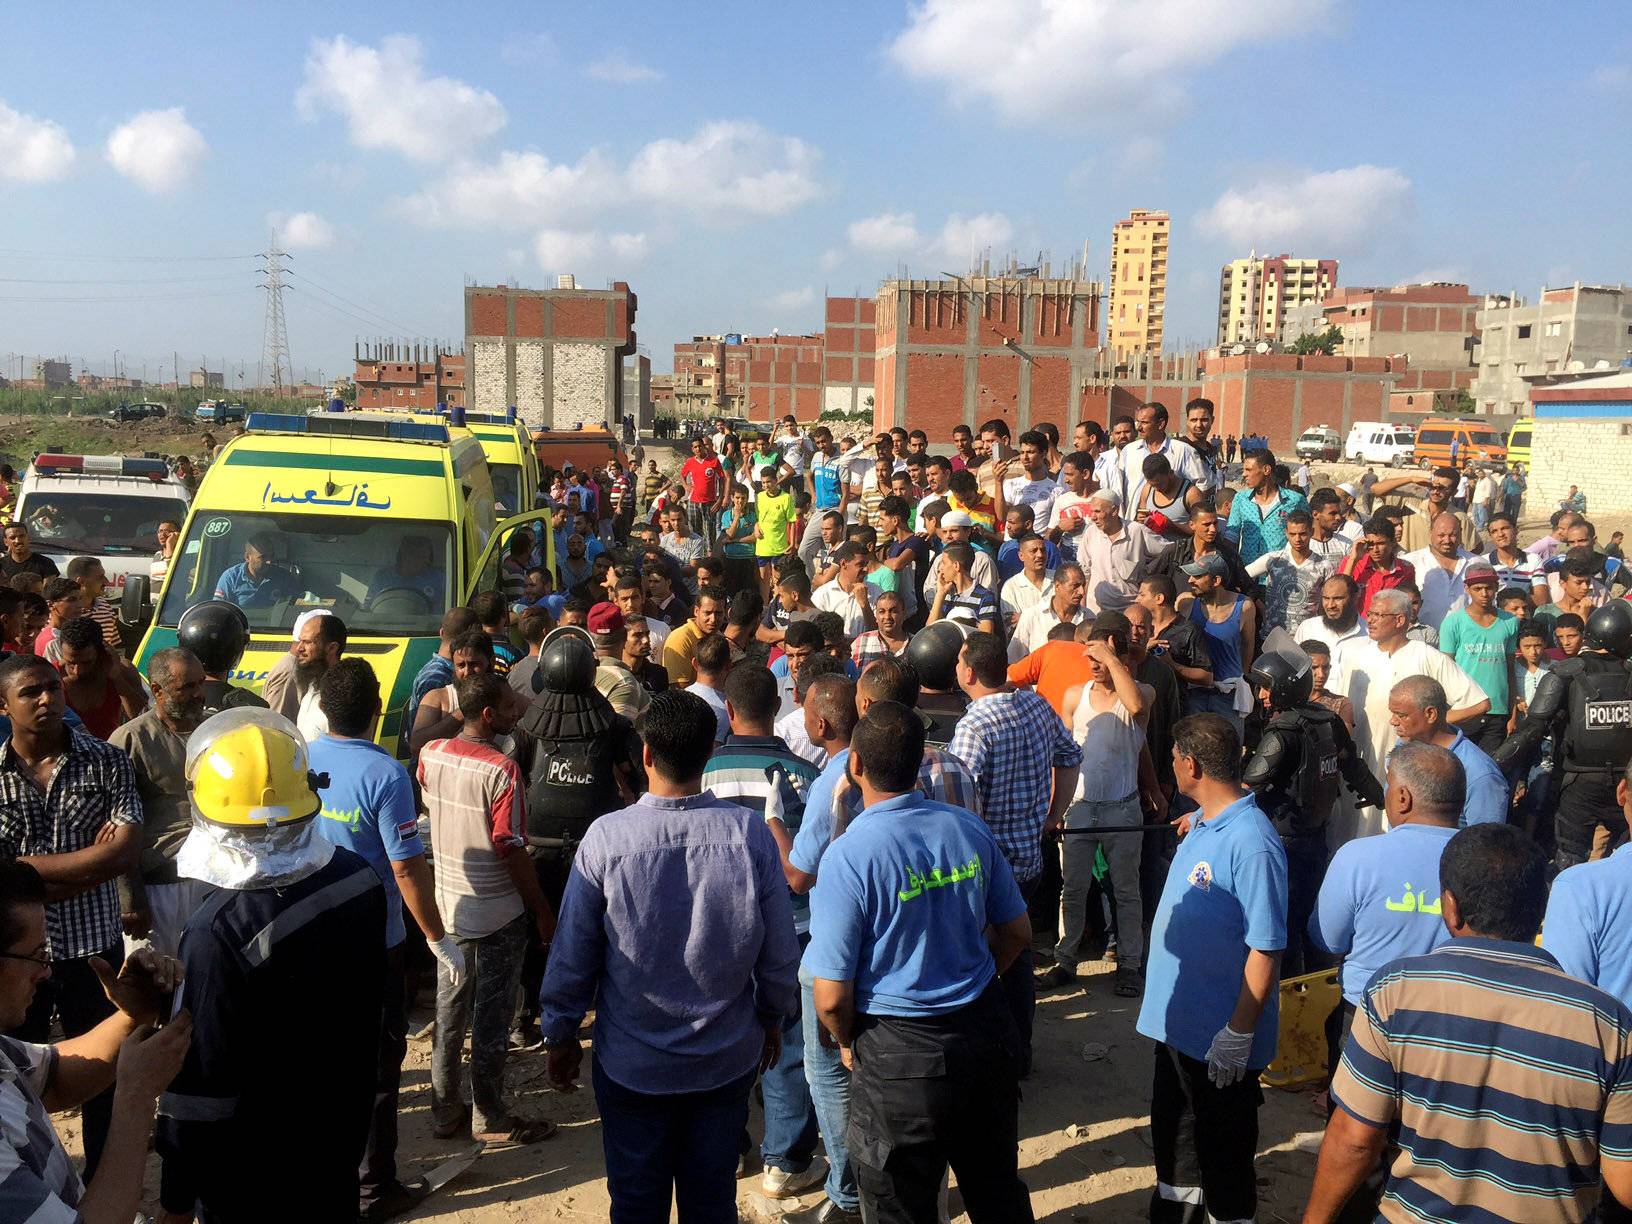 Egyptians and security personnel are seen at the site of a crash where two trains collided near the Khorshid station in Egypt's coastal city of Alexandria